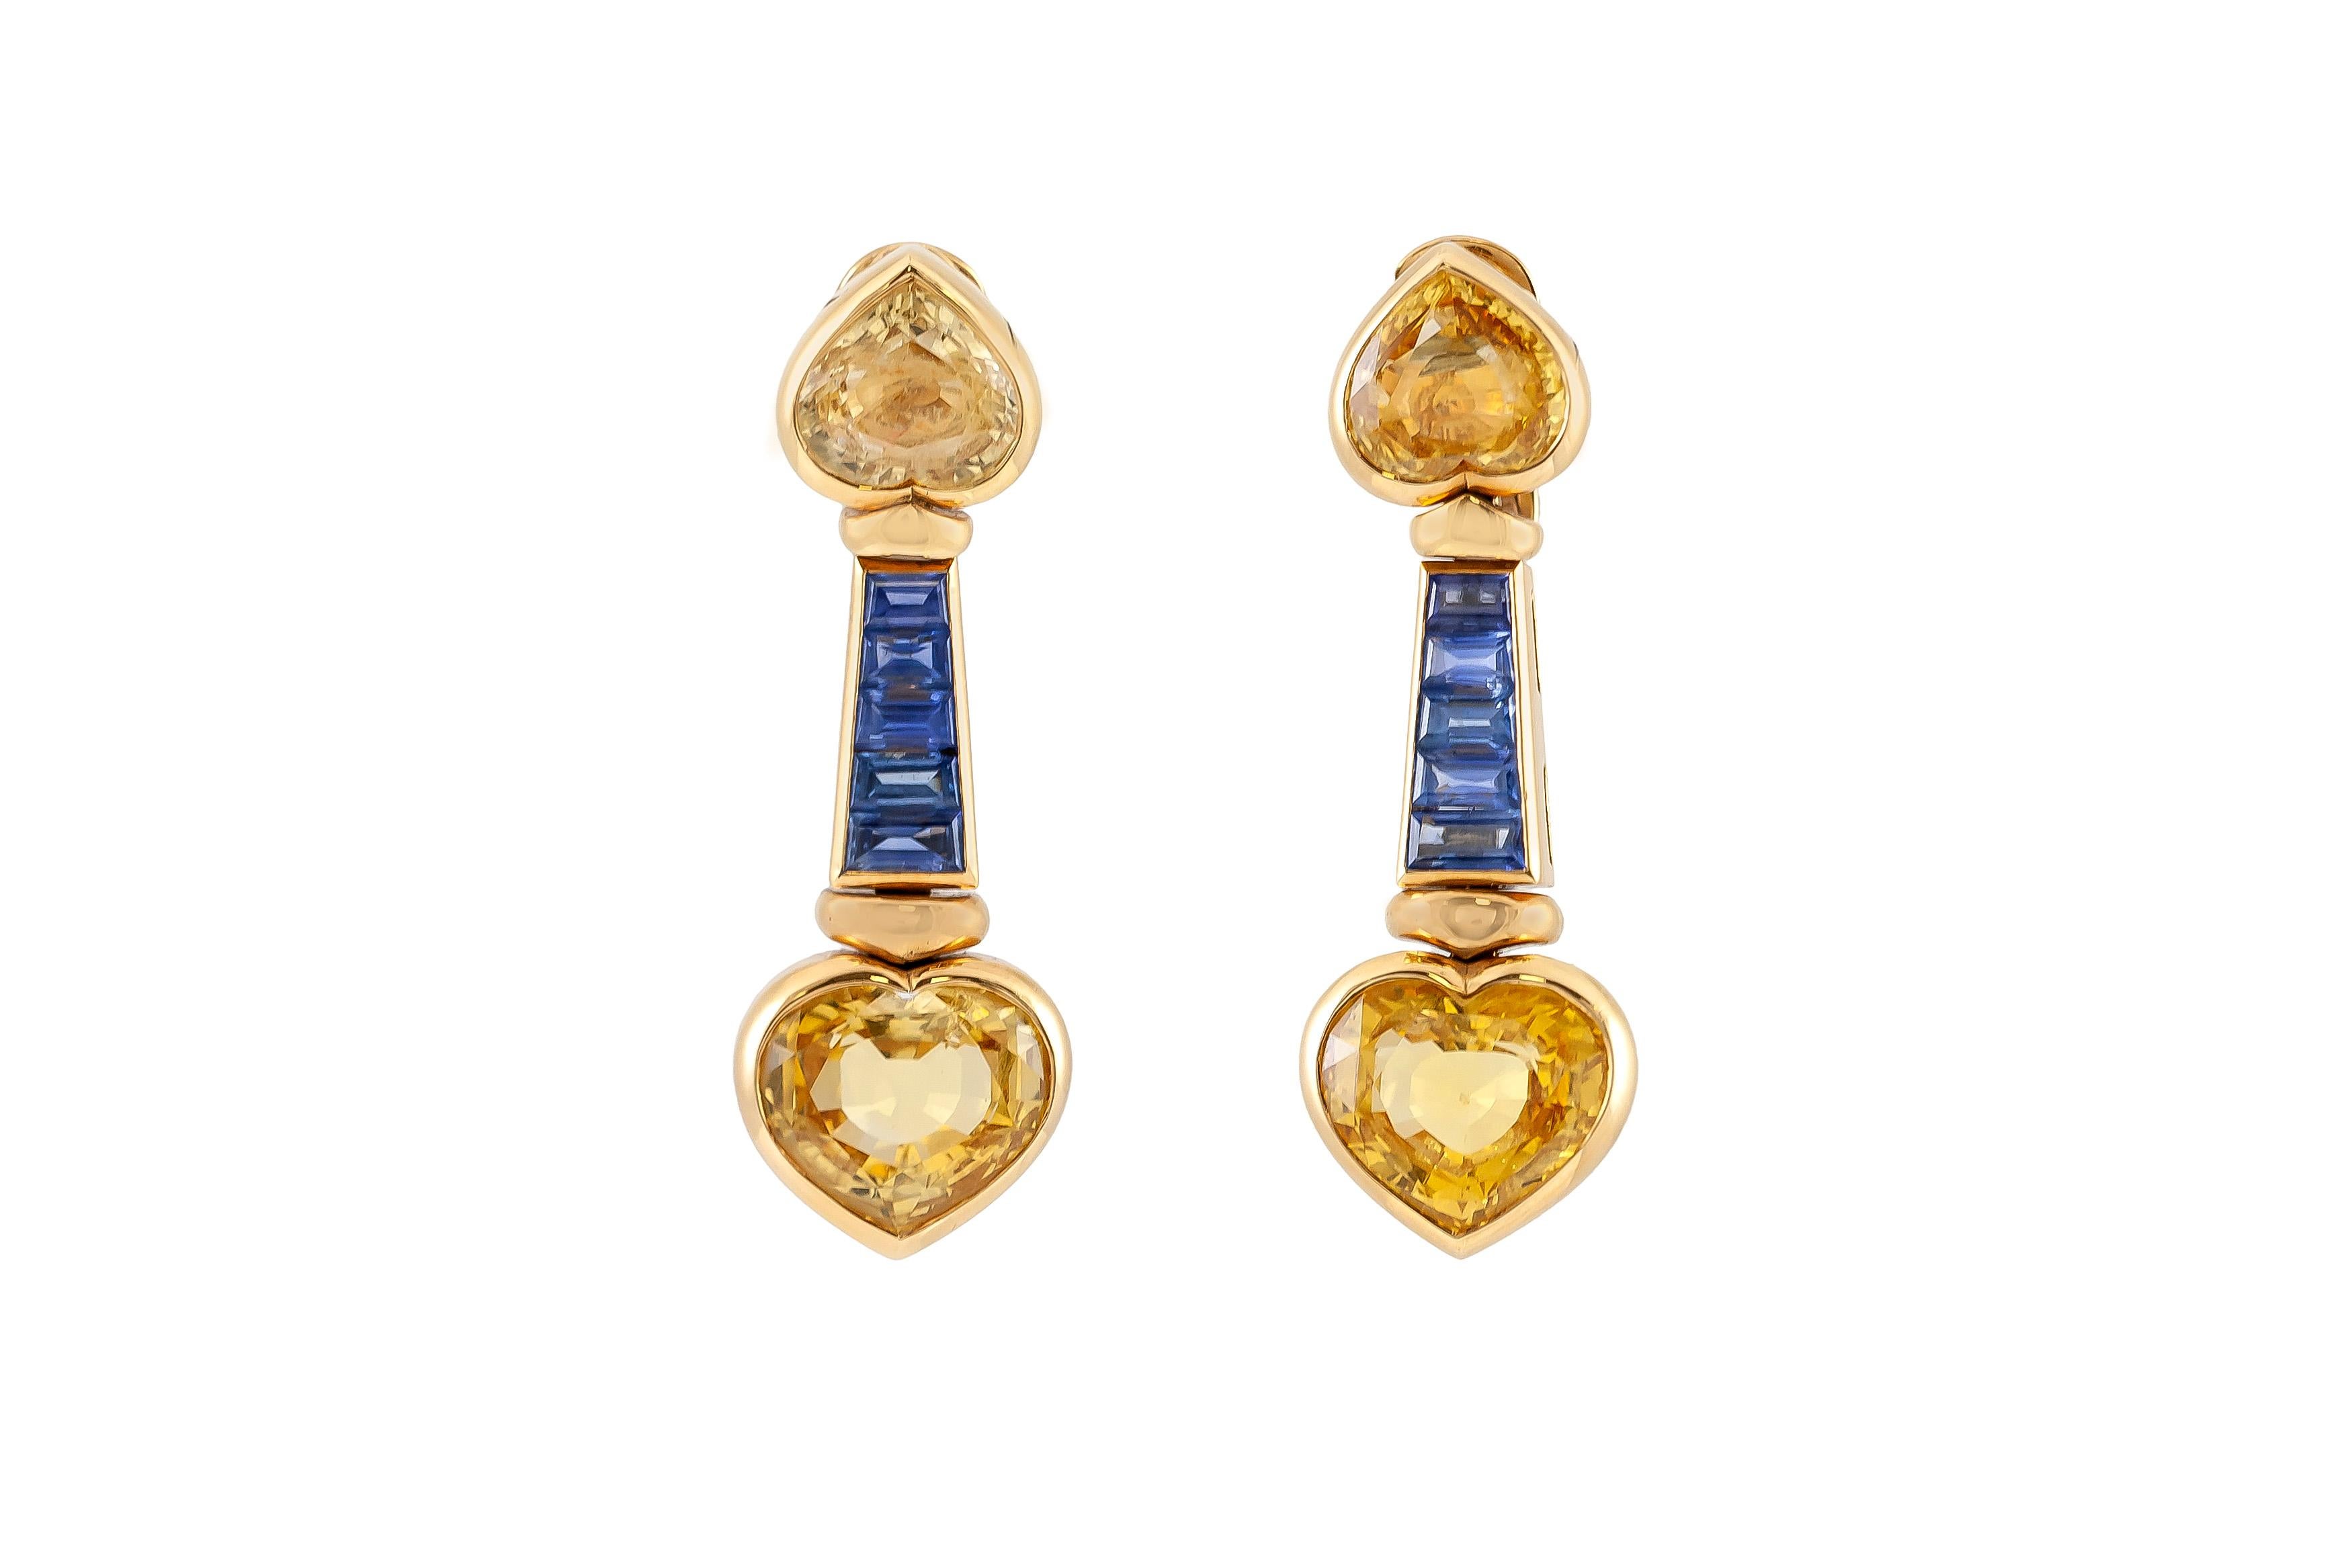 Heart Cut Bvlgari Yellow and Blue Sapphire Heart Necklace and Earrings Set